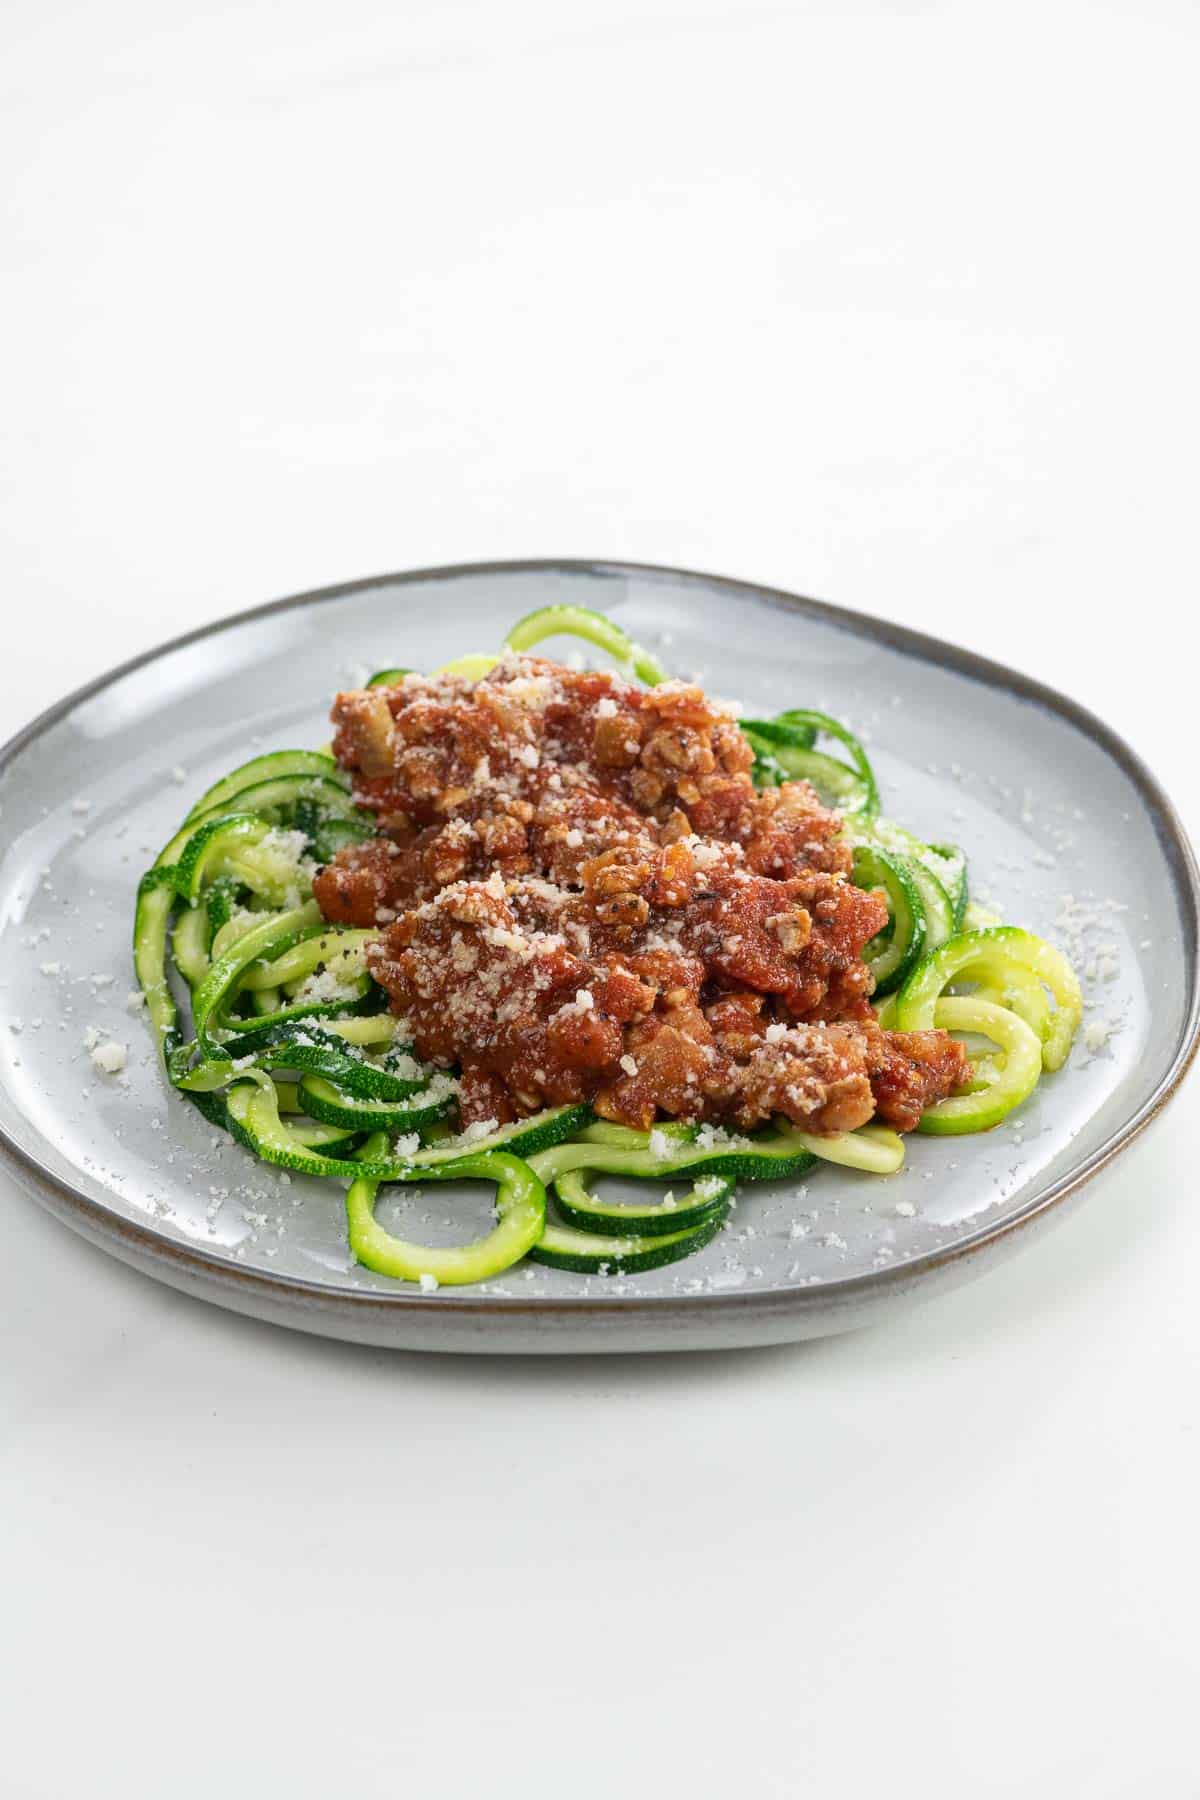 zoodle spaghetti wtih turkey meat sauce on a plate